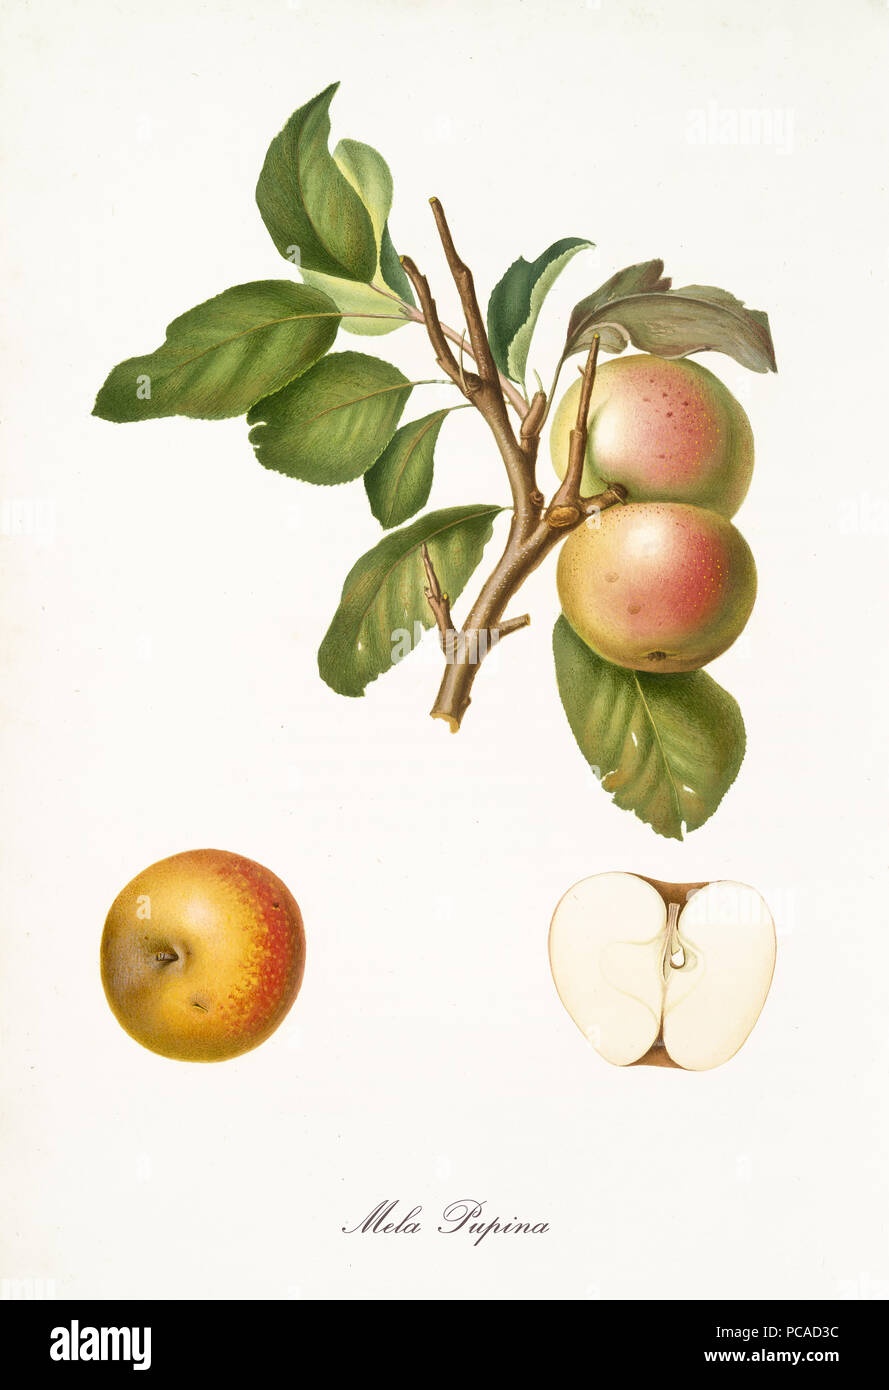 Apple, called Pupina apple, on a single branch with leaves and isolated single apple section on white background. Old botanical illustration realized by Giorgio Gallesio on 1817, 1839 Stock Photo